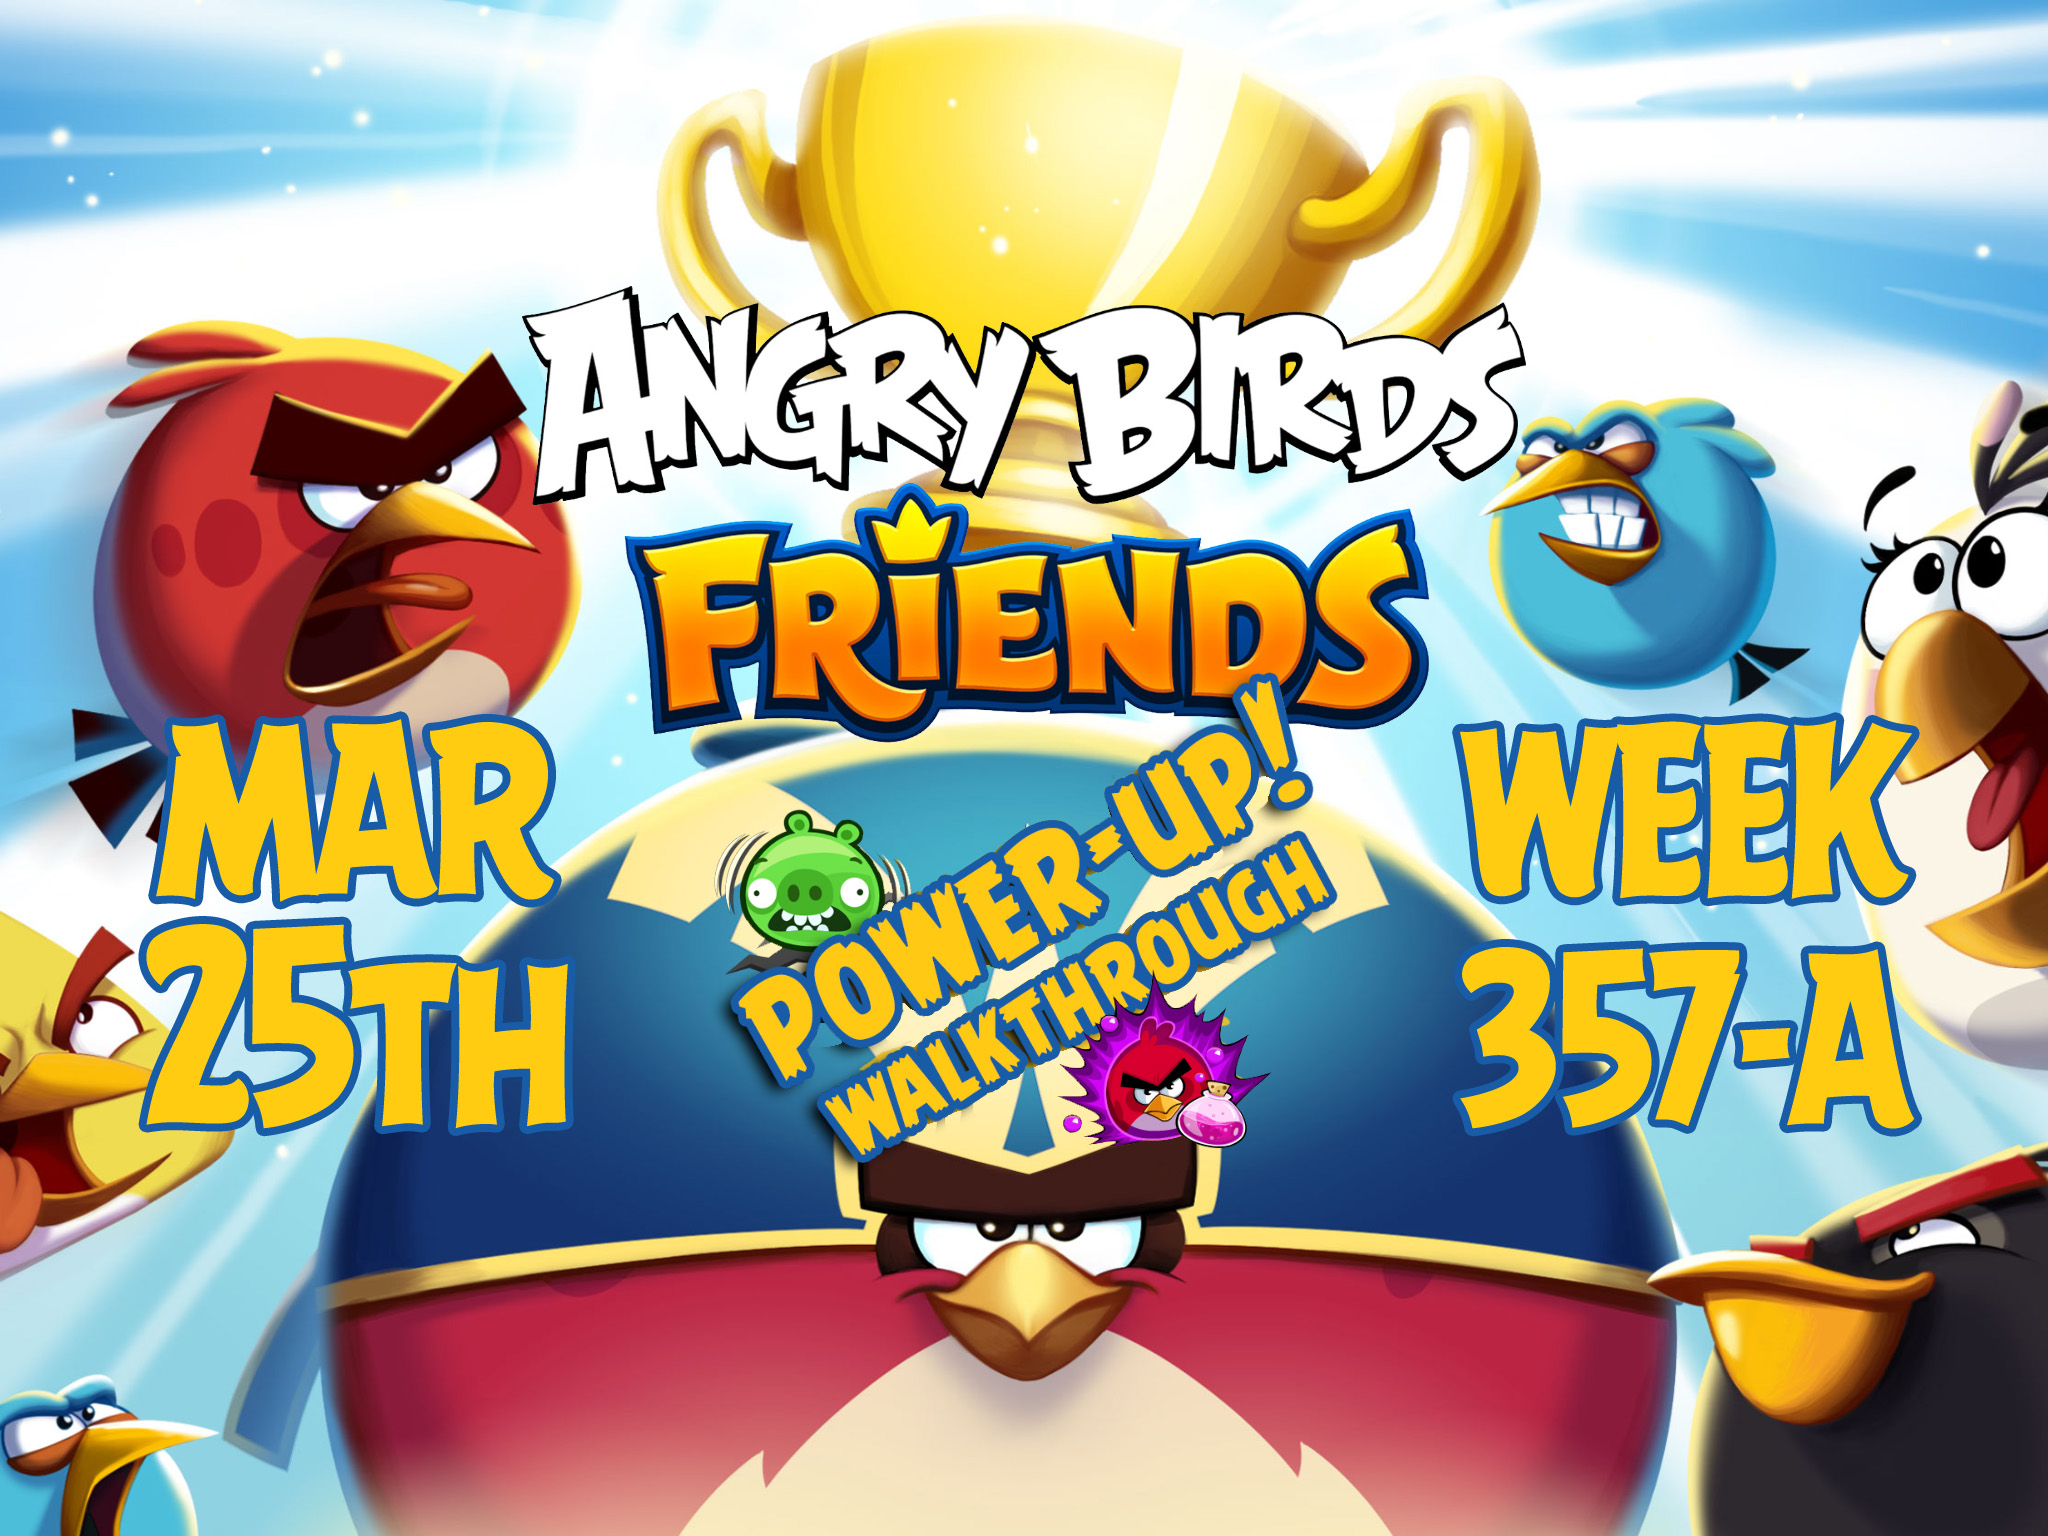 Angry-Birds-Friends-Tournament-Week-357-A-Feature-Image-PU